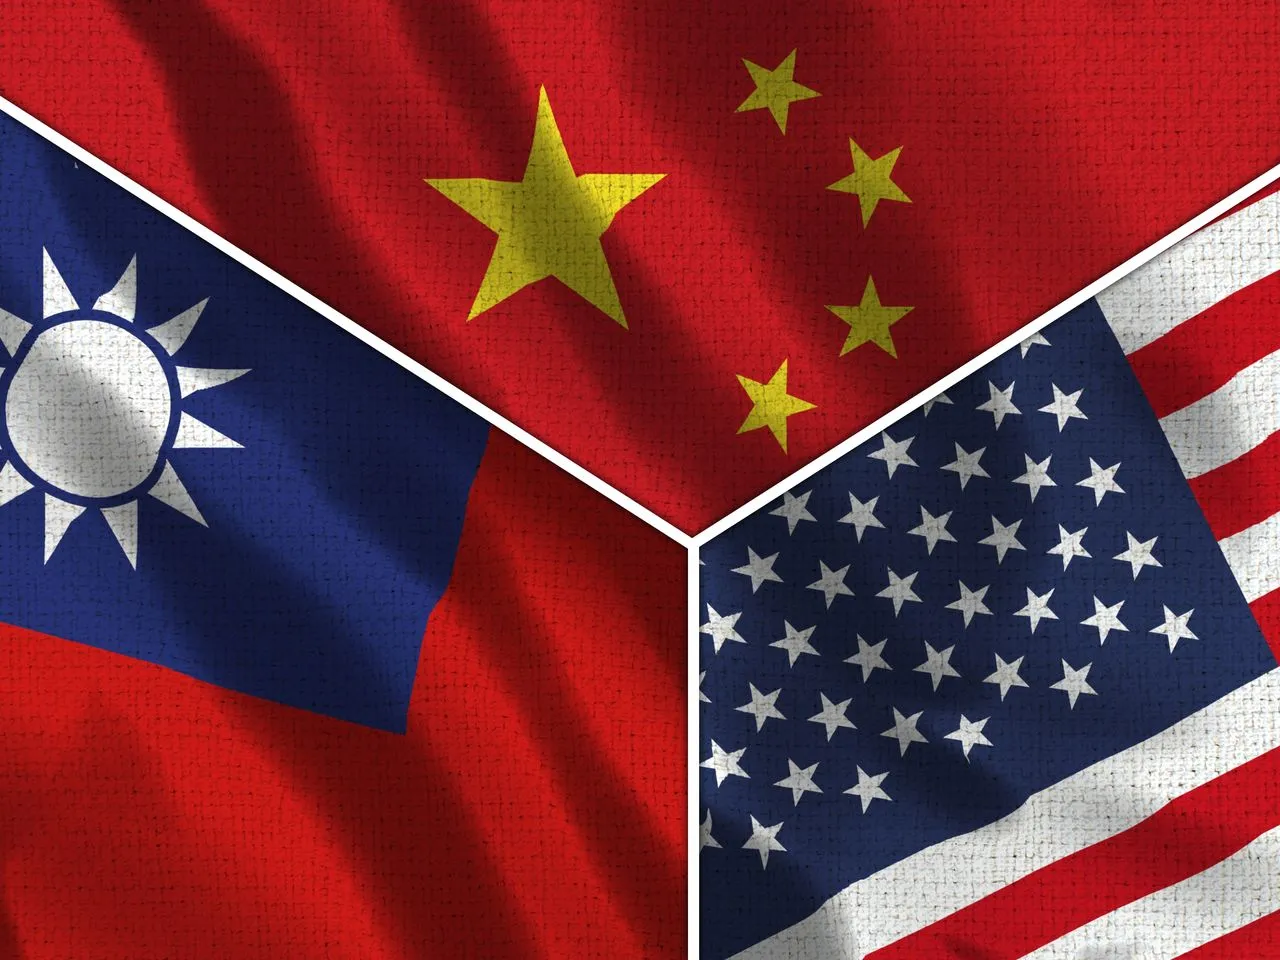 chinese-government-criticizes-us-plan-for-taiwan-deal